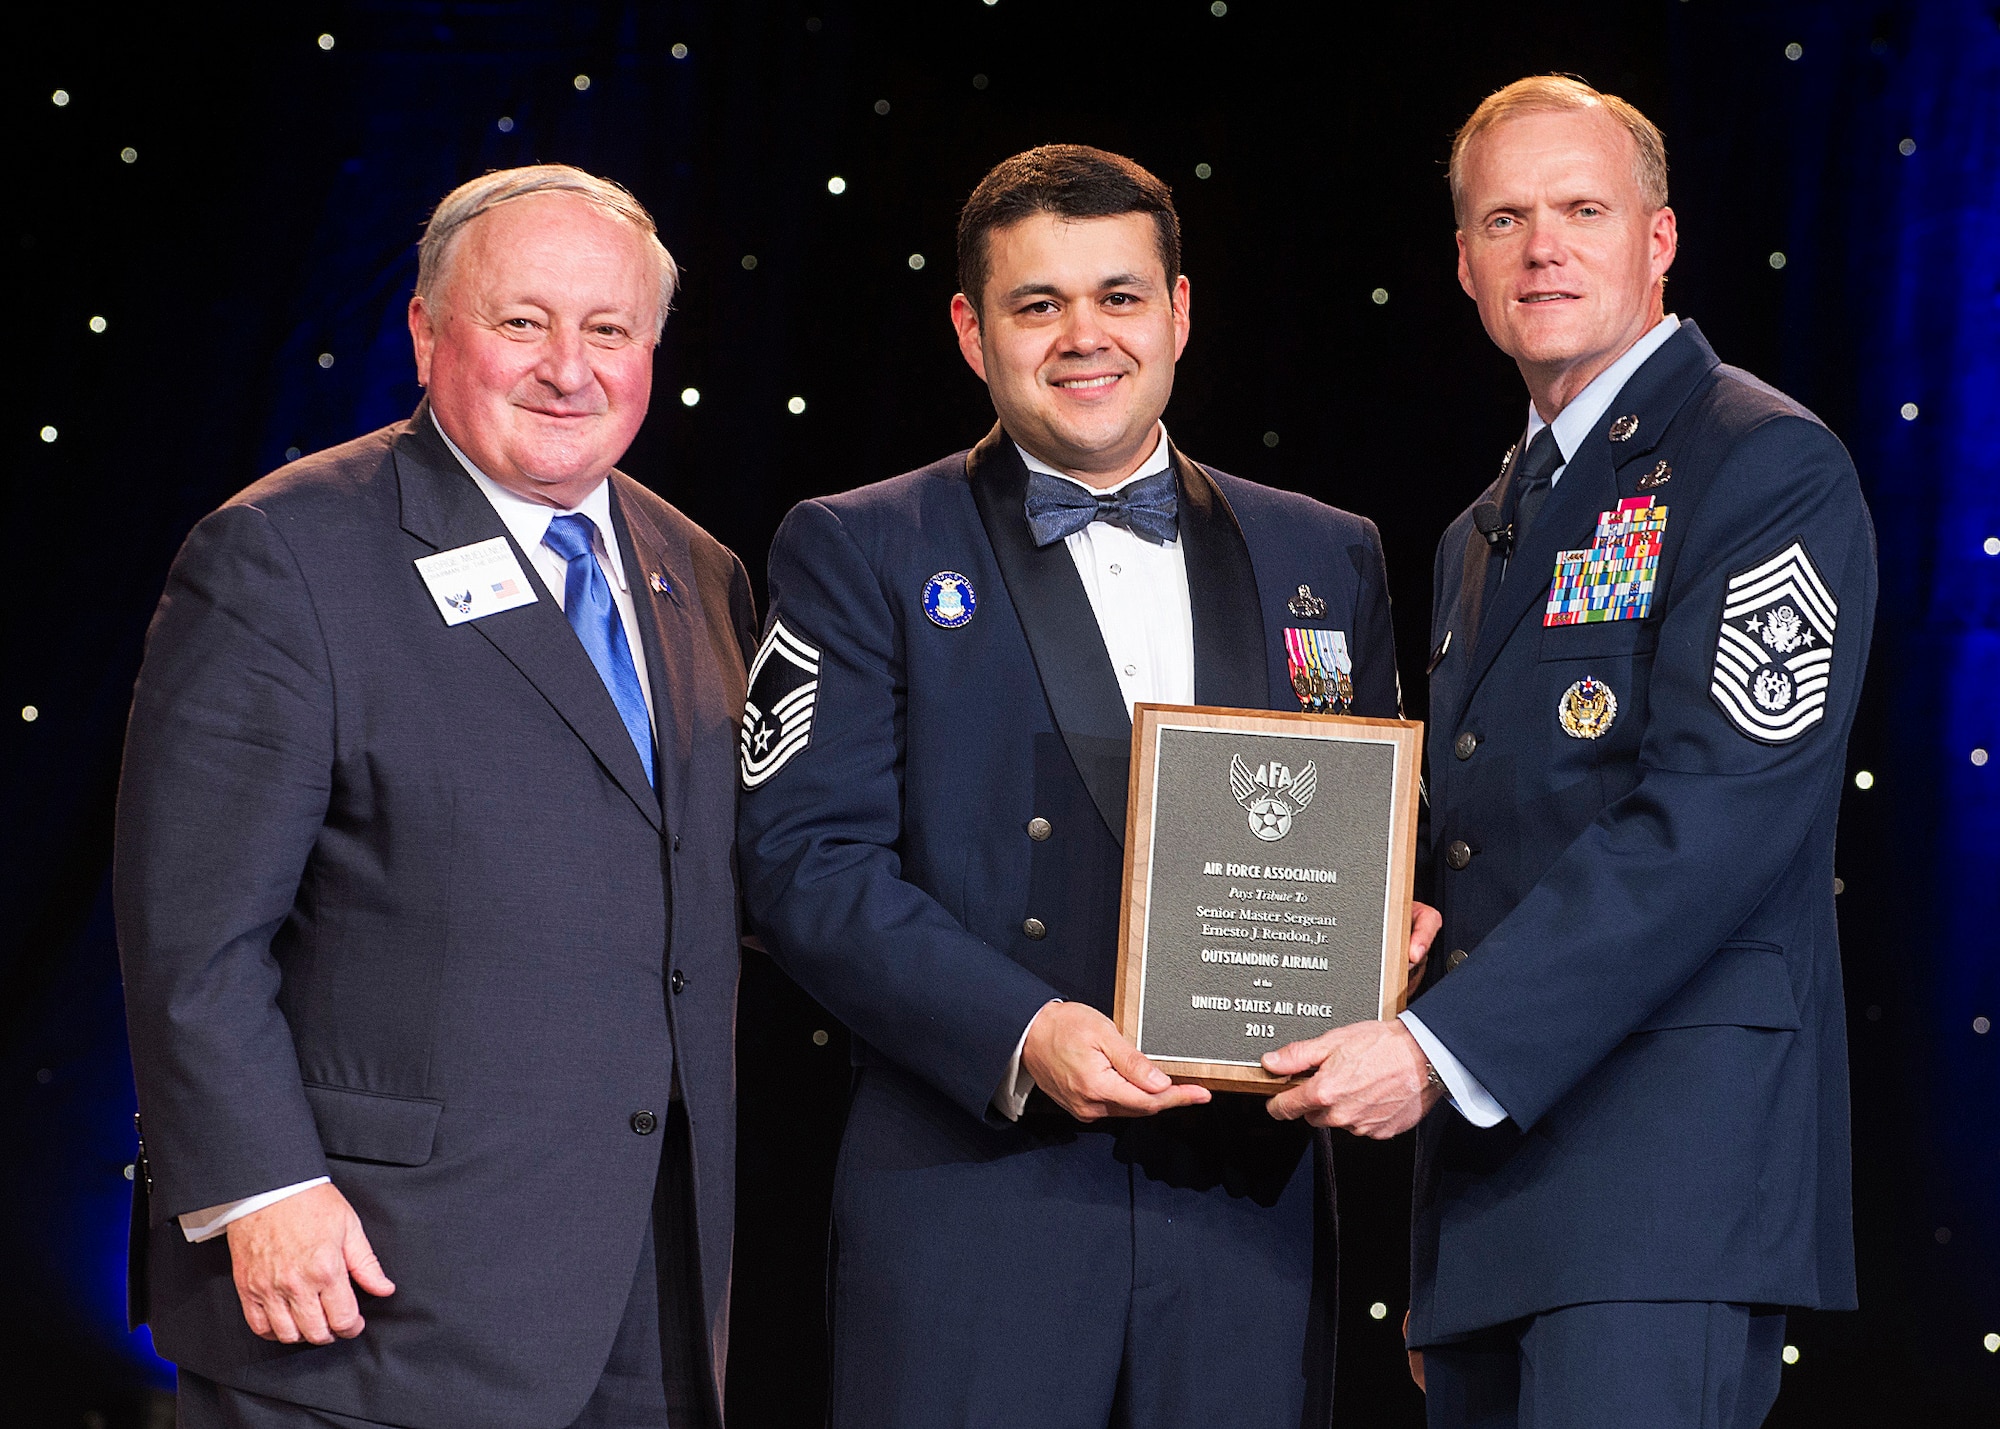 Senior Master Sgt. Ernesto Rendon Jr. was recognized as one of the 12 Outstanding Airmen of a Year at a reception and awards dinner hosted by the Air Force Association during the AFA's annual Air & Space Conference and Technology Exposition Sept. 16, 2013, in Washington, D.C. The OAY award recognizes the top 12 outstanding enlisted Airmen for superior leadership, job performance, community involvement and personal achievements. Rendon is an air freight superintendent with the 62nd Aerial Port Squadron at Joint Base Lewis-McChord, Wash. (U.S. Air Force photo/Jim Varhegyi)